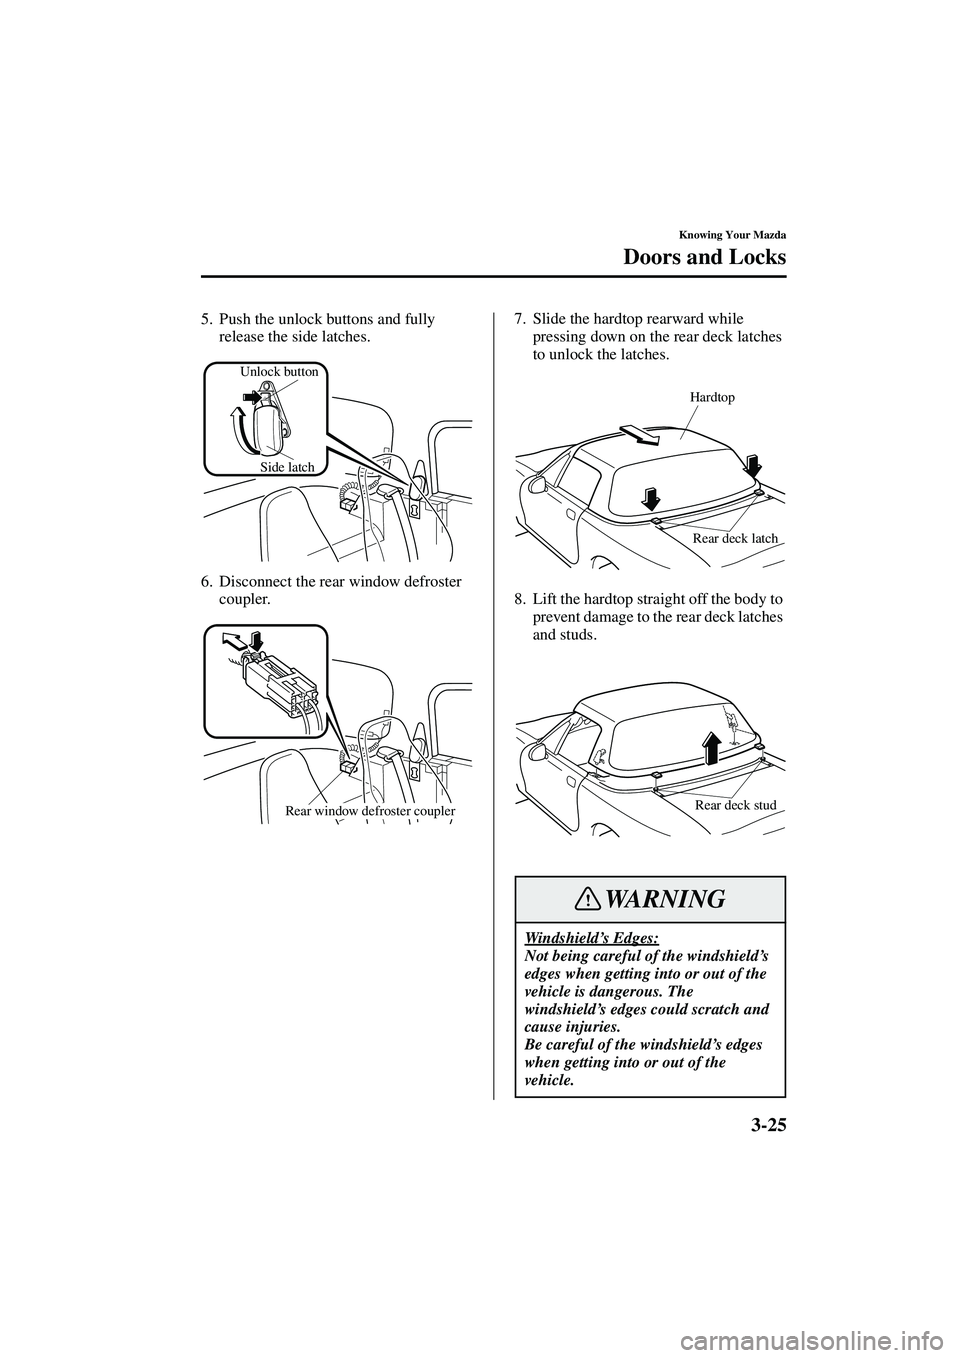 MAZDA MODEL MX-5 MIATA 2004  Owners Manual 3-25
Knowing Your Mazda
Doors and Locks
Form No. 8S15-EA-03G
5. Push the unlock buttons and fully release the side latches.
6. Disconnect the rear window defroster  coupler. 7. Slide the hardtop rearw